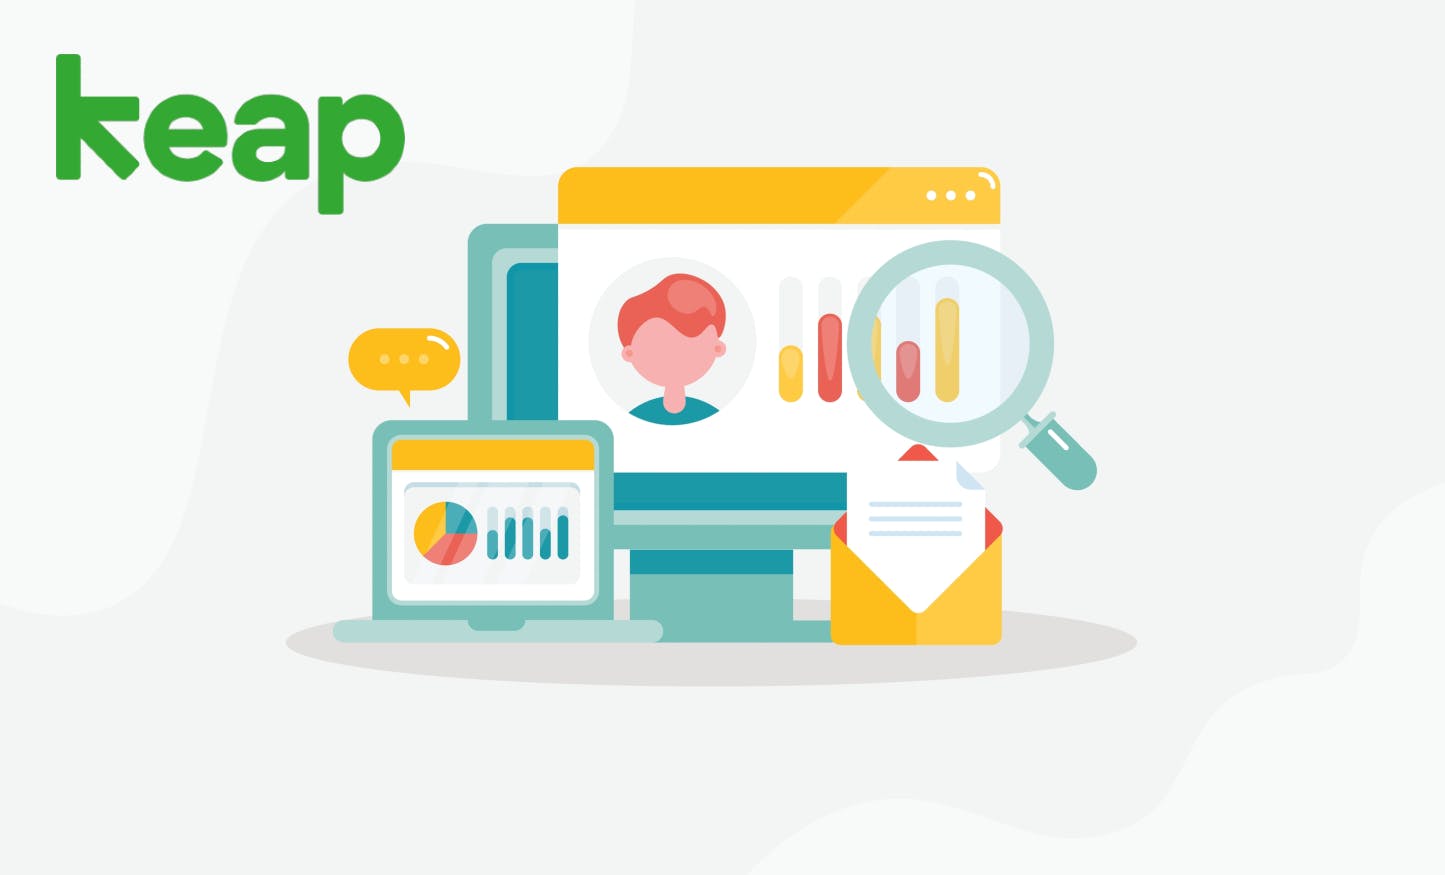 Keap CRM: Review, Key Features, and Prices